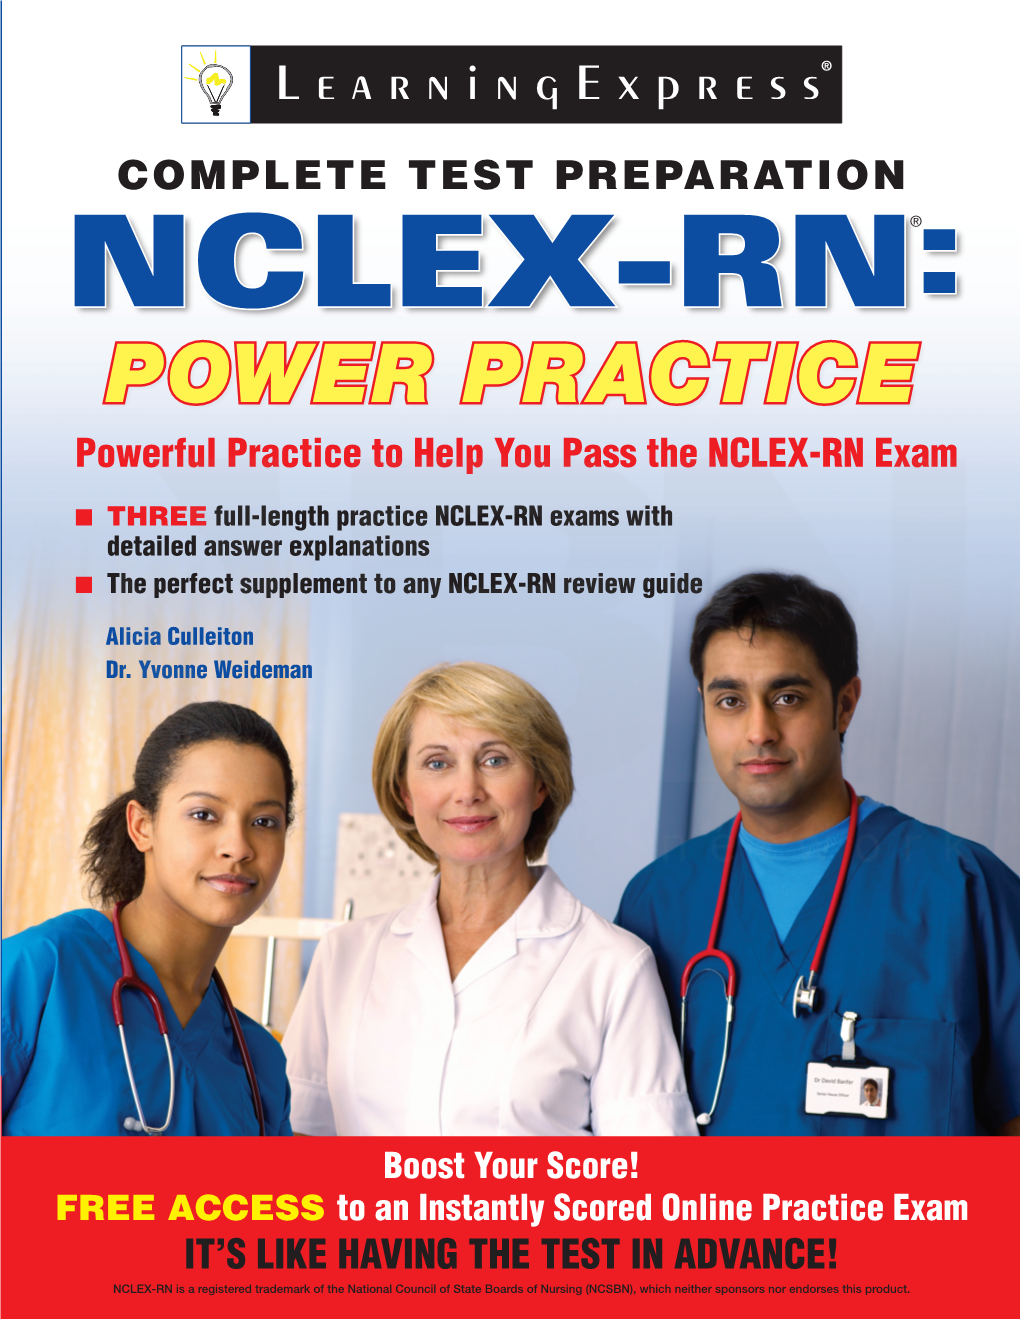 Power Practice Provides the Concentrated Practice Students NCLEX-RN: Need to Earn a Top Score